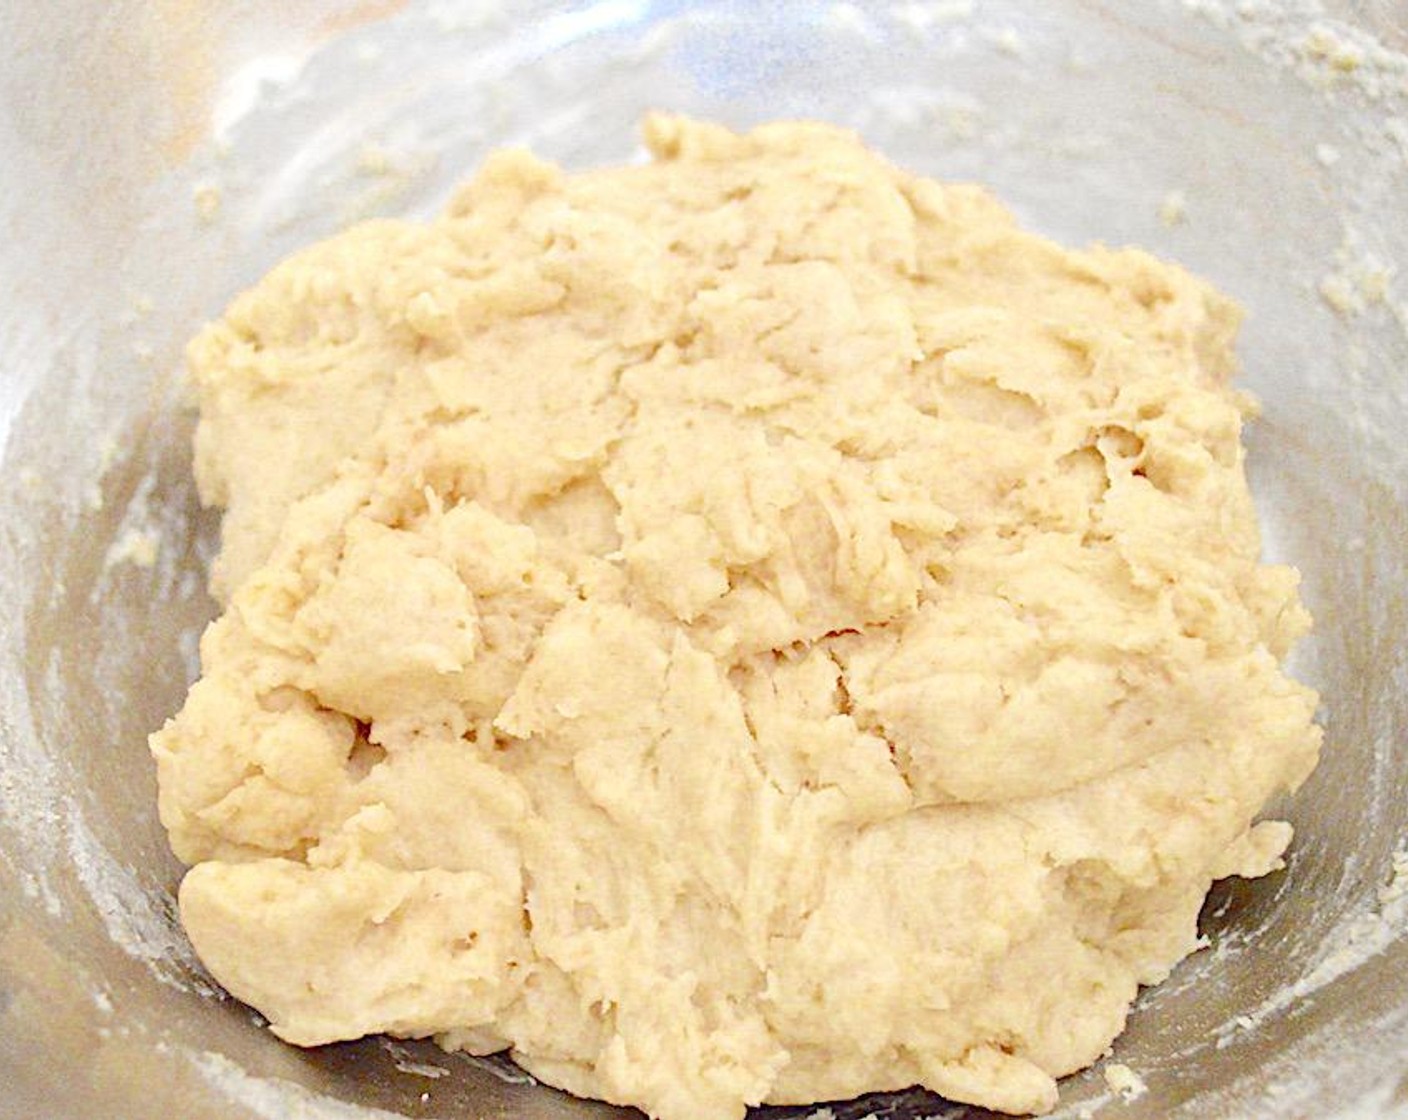 step 2 Then stir in the All-Purpose Flour (1 3/4 cups) until it becomes a soft dough. Cover it with plastic wrap and let it ferment for 45 minutes in a warm, dry place. When the time is almost up, start on the pate.